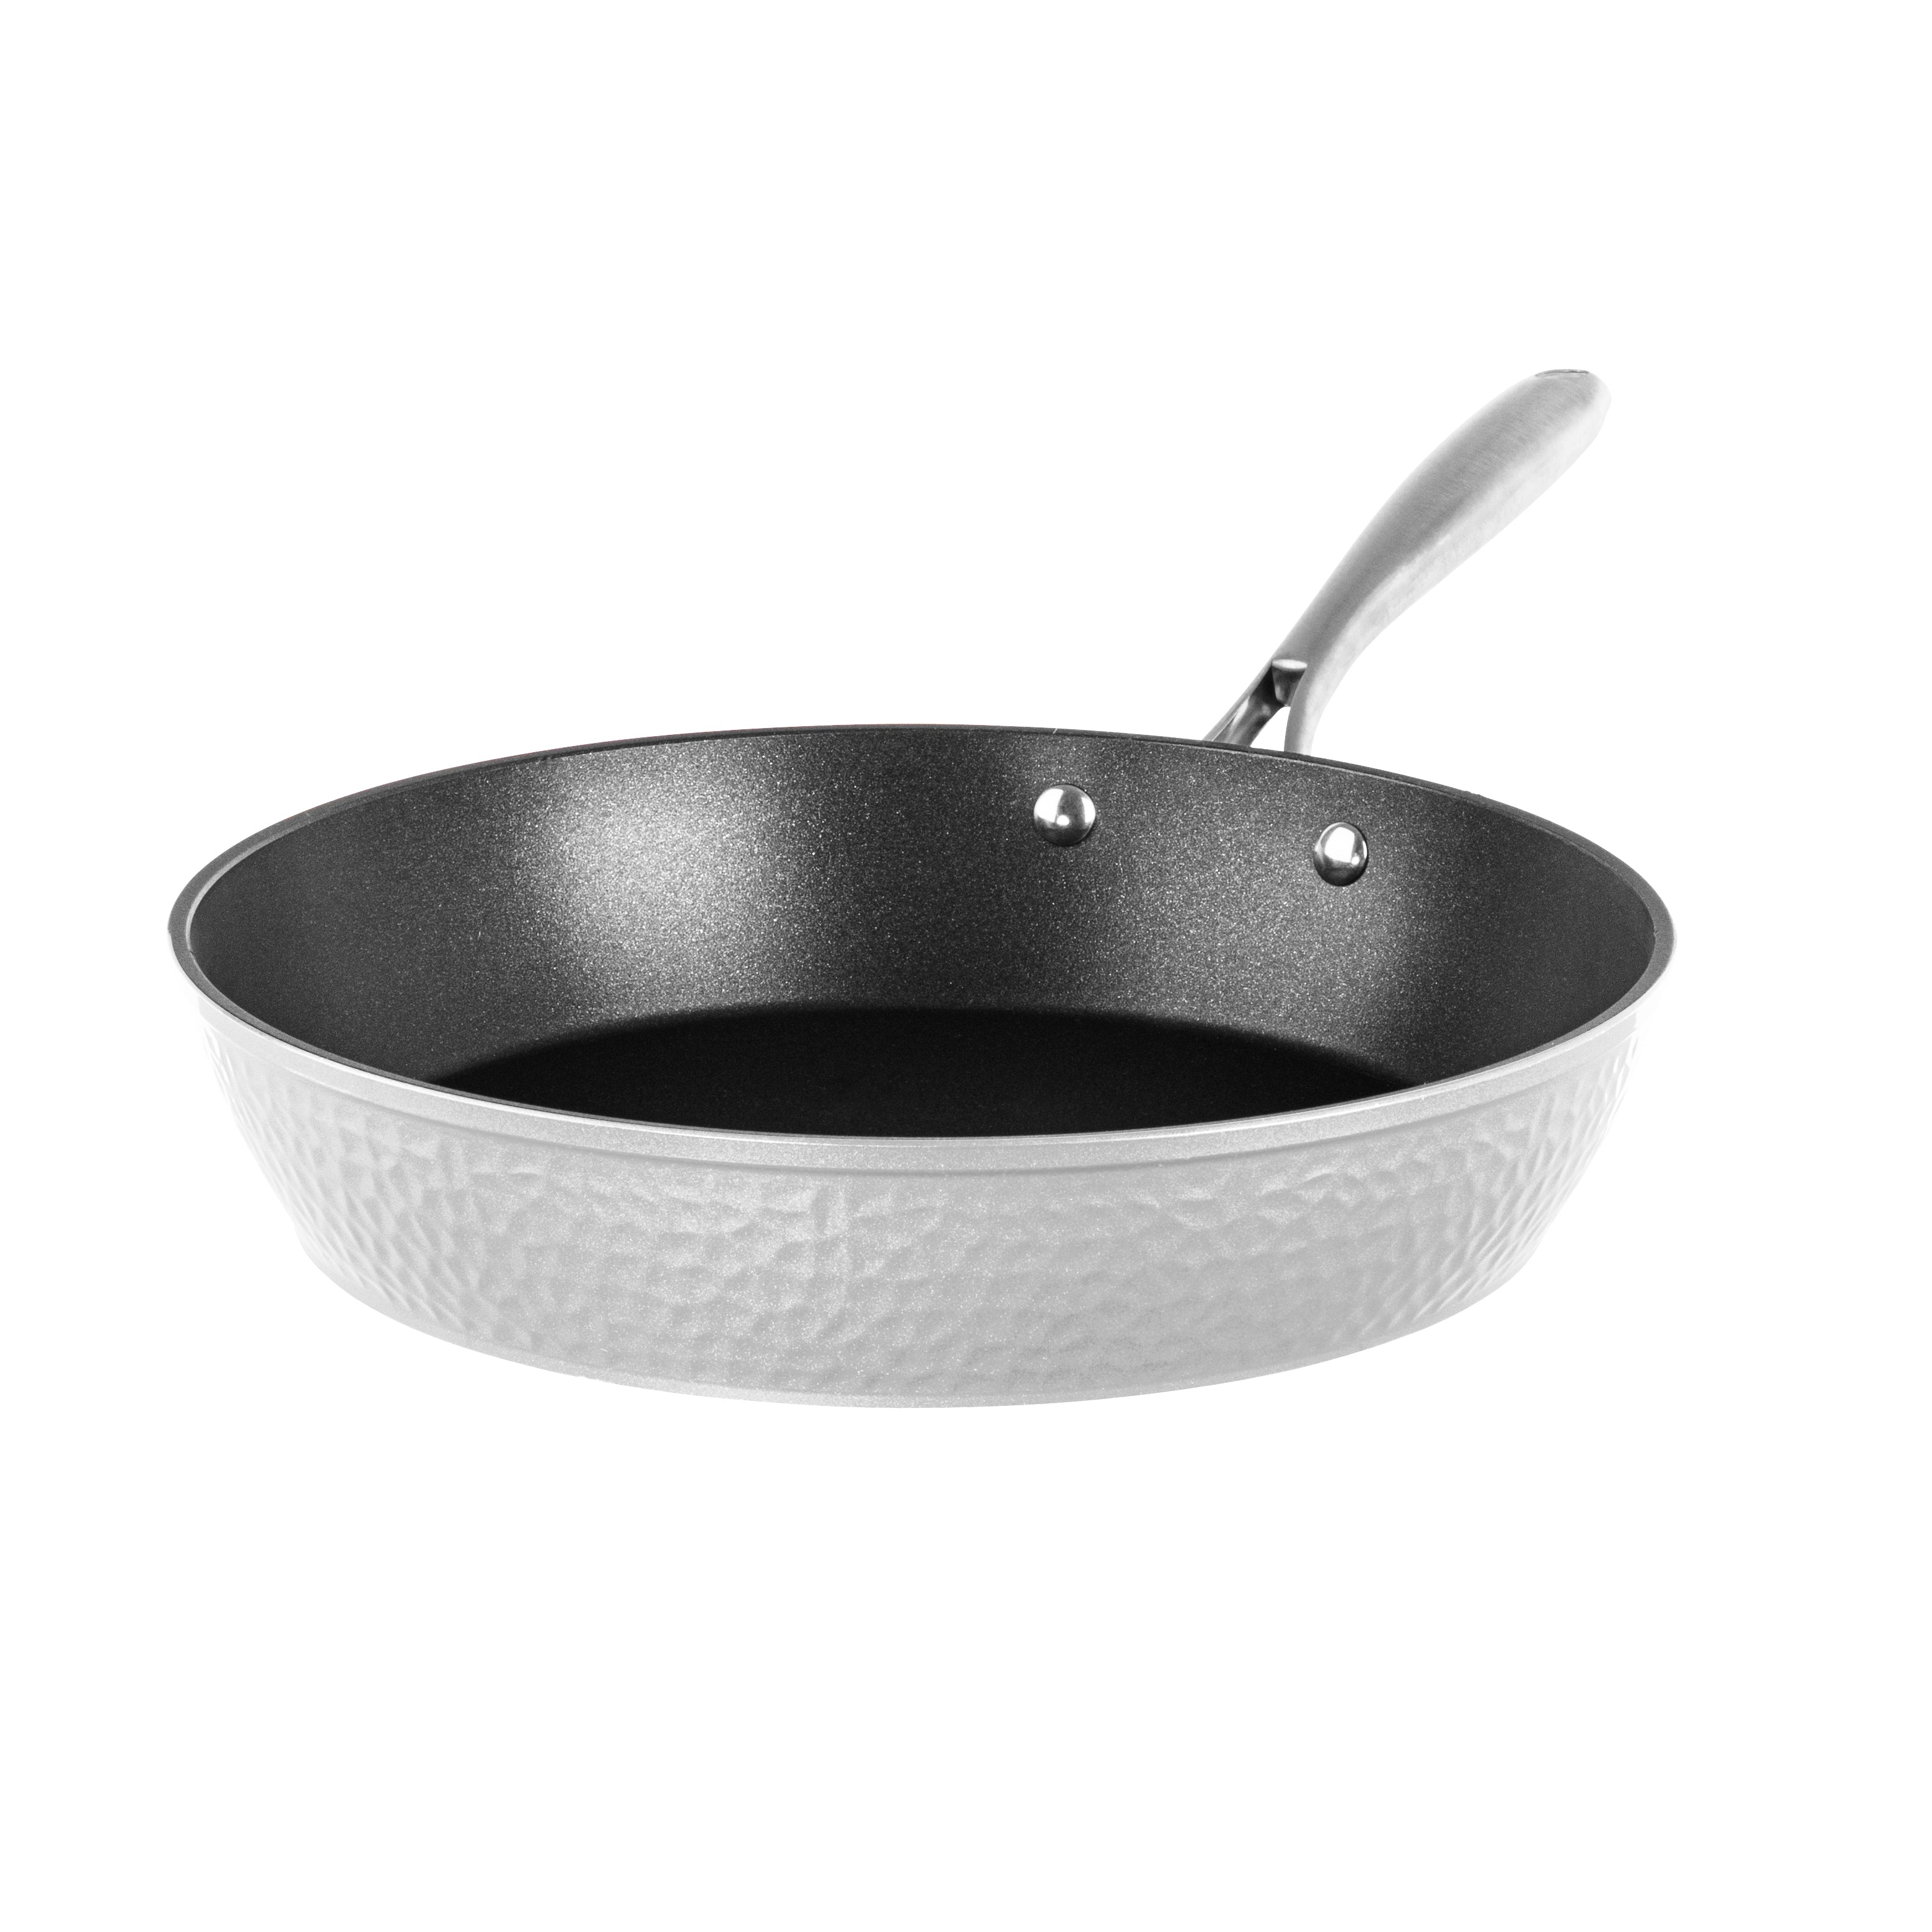 Frying pan 20 cm with non-stick coating Glamour Stone